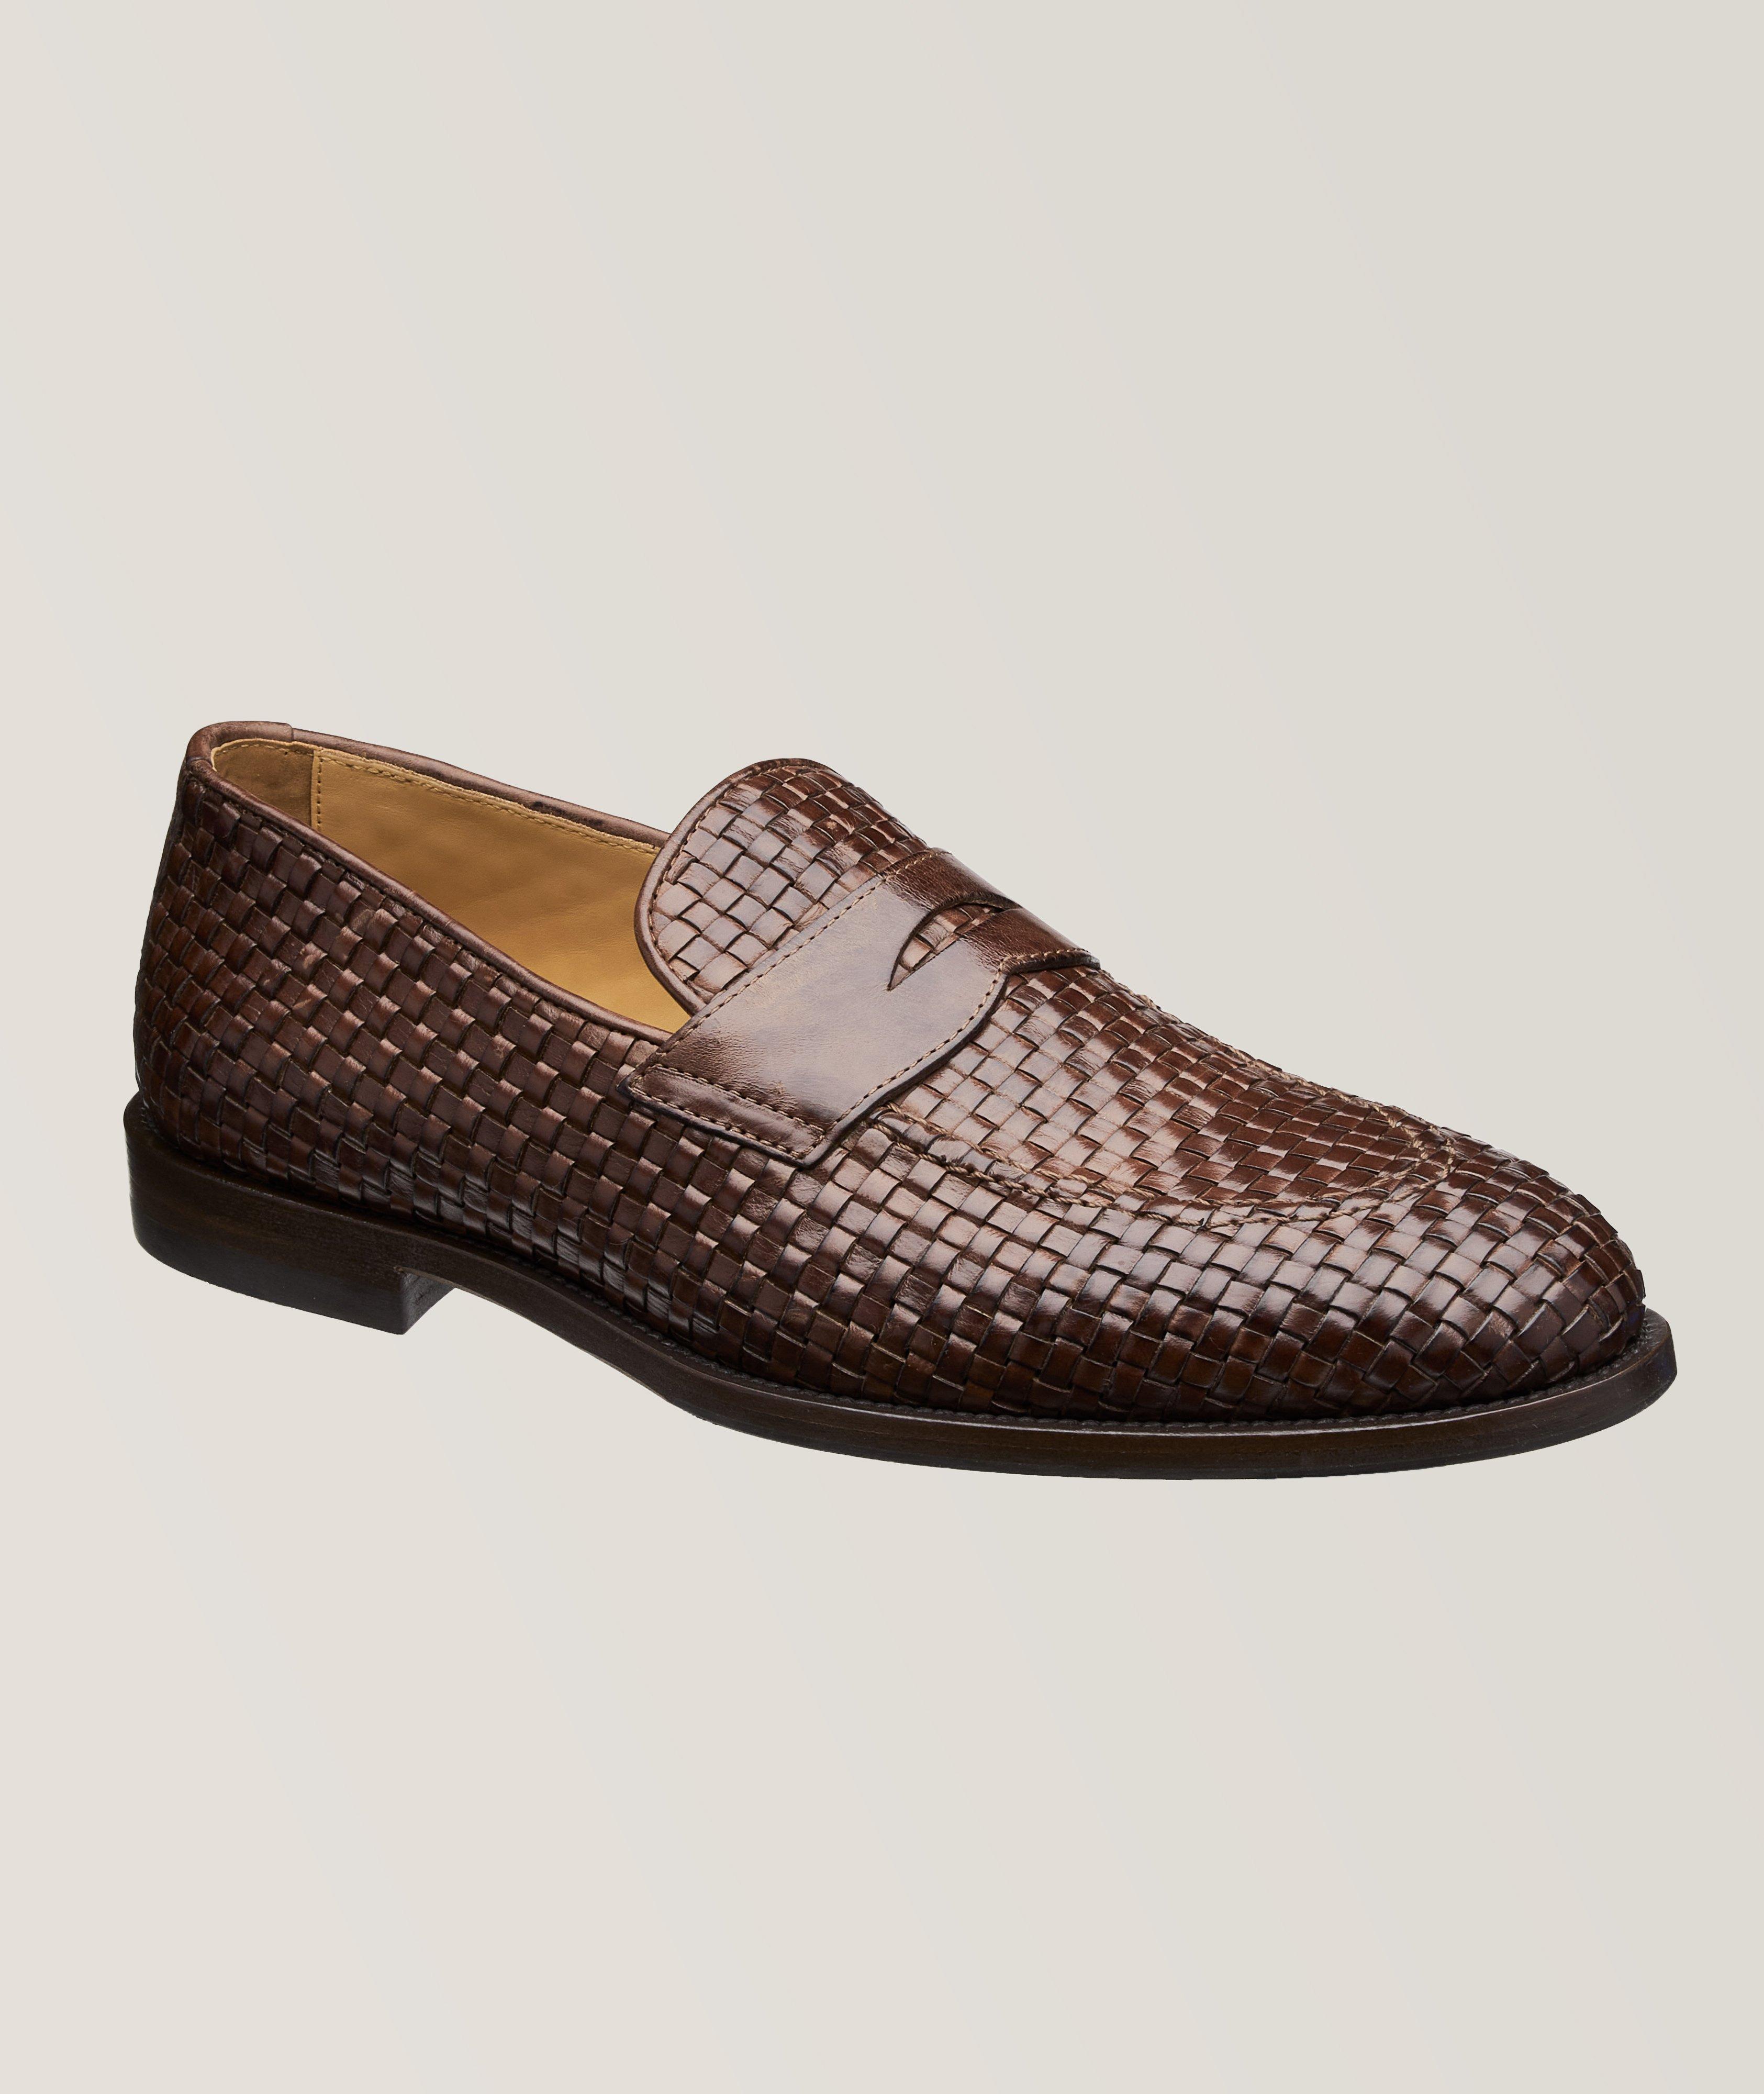 Brunello Cucinelli Burnished Woven Leather Penny Loafers 